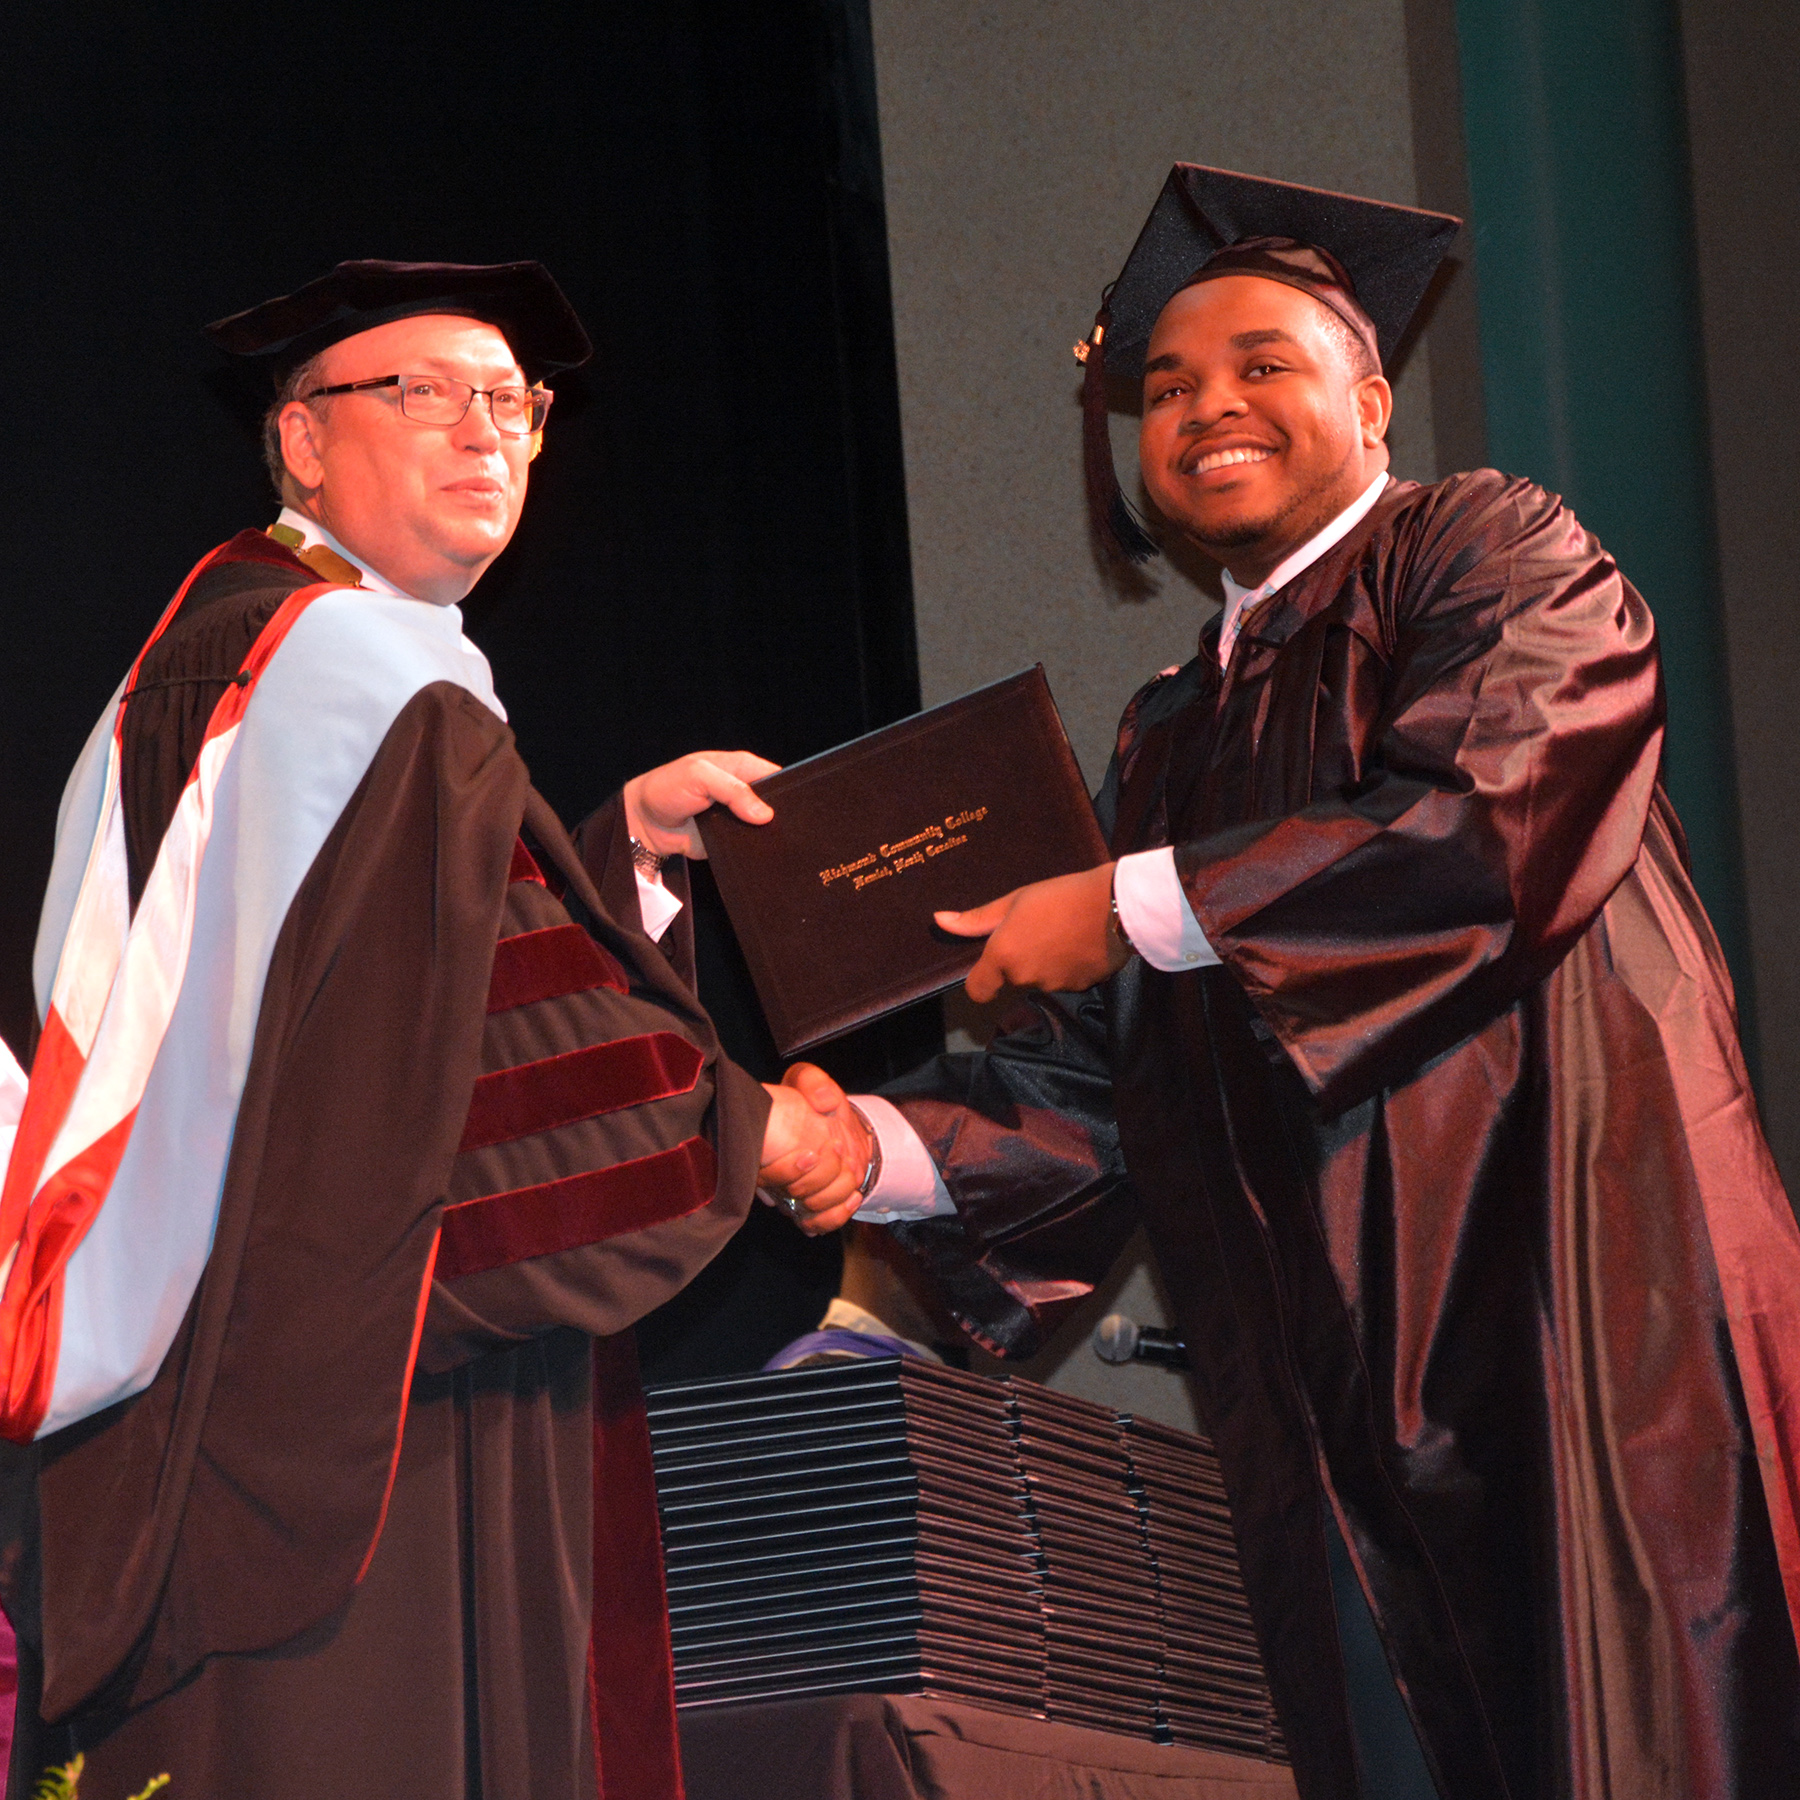 Richmond Community College graduate receives a diploma from College President Dr. Dale McInnis.